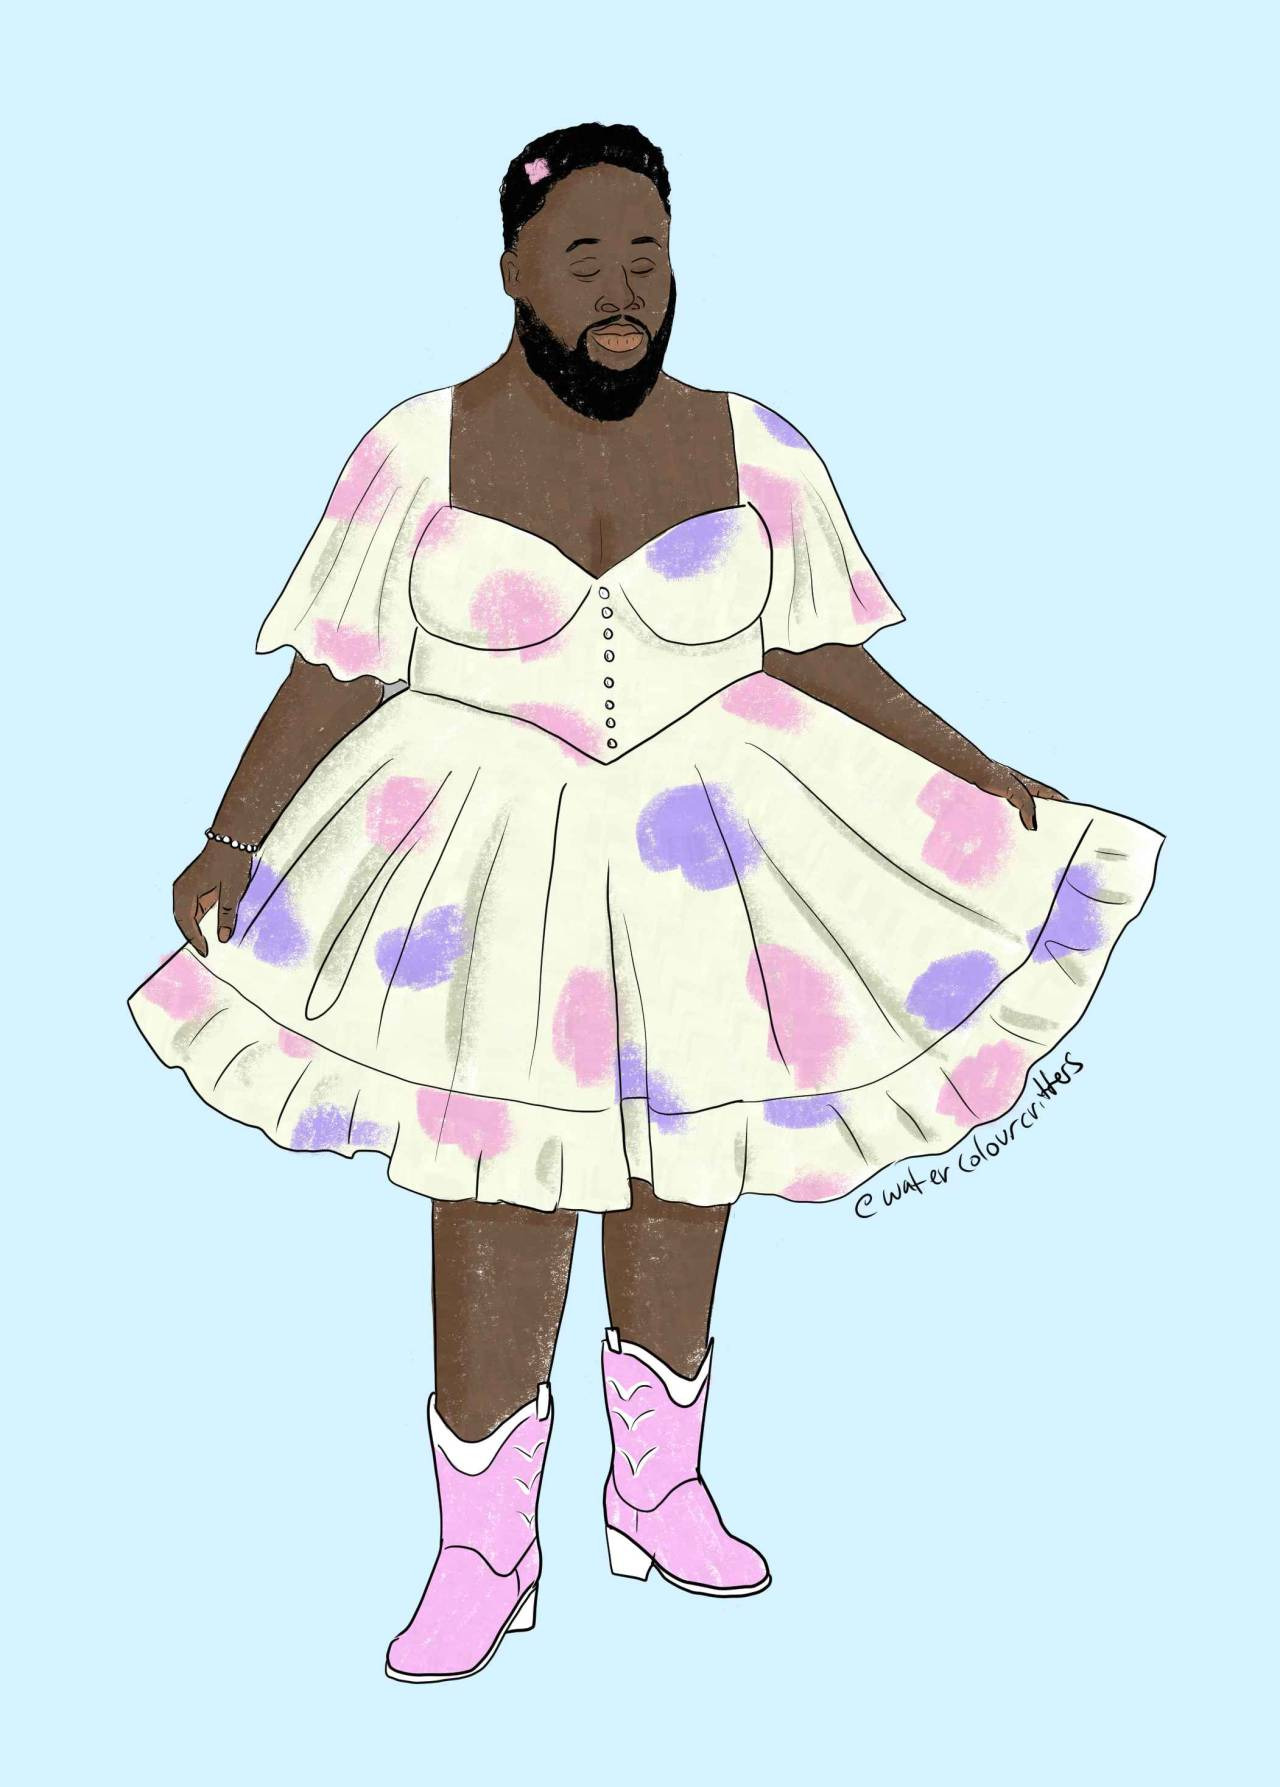 A digital painting of Oluwande from OFMD, drawn wearing a dress. The dress is knee length with a fitted bodice, wide frilly skirt, and draped sleeves. It is a very pale yellow or cream, with large pink and purple floral design. Oluwande stands posed holding the skirt out, and is smiling and looking content and peaceful. He also wears pink cowboy boots, and a pink flower in his hair. The background is a plain light blue, and the artist's signature reads @ watercolour critters.